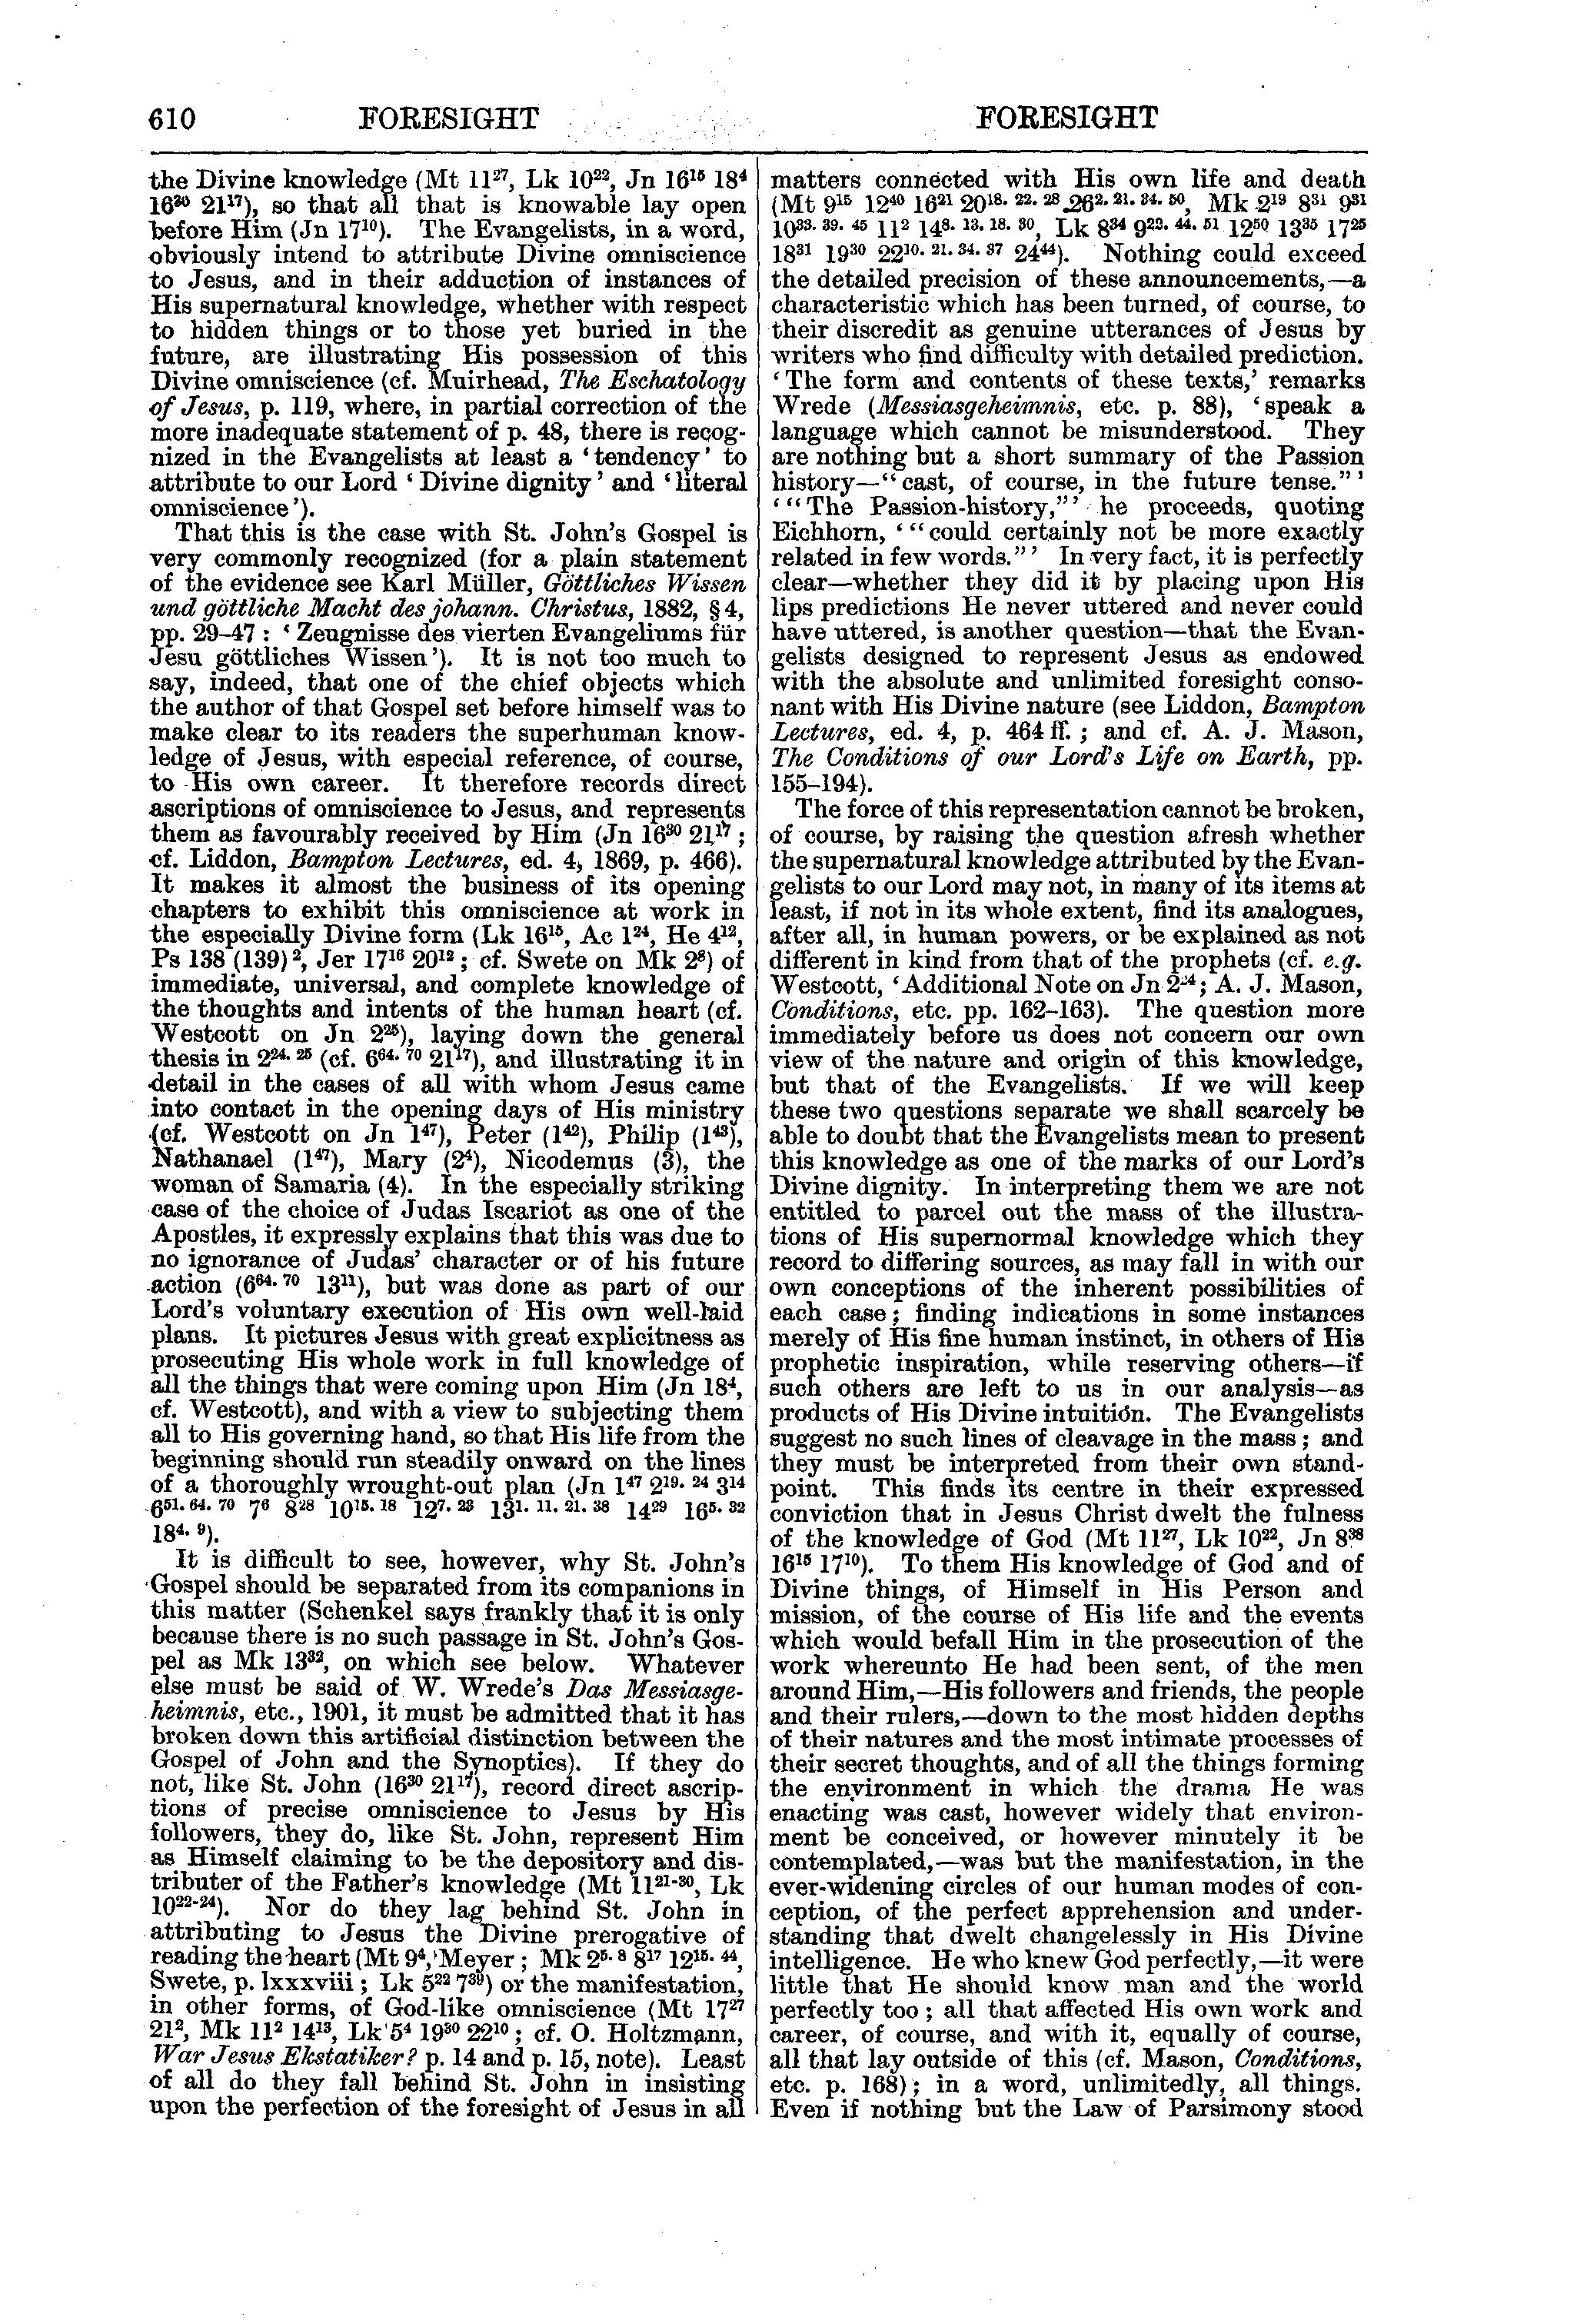 Image of page 610